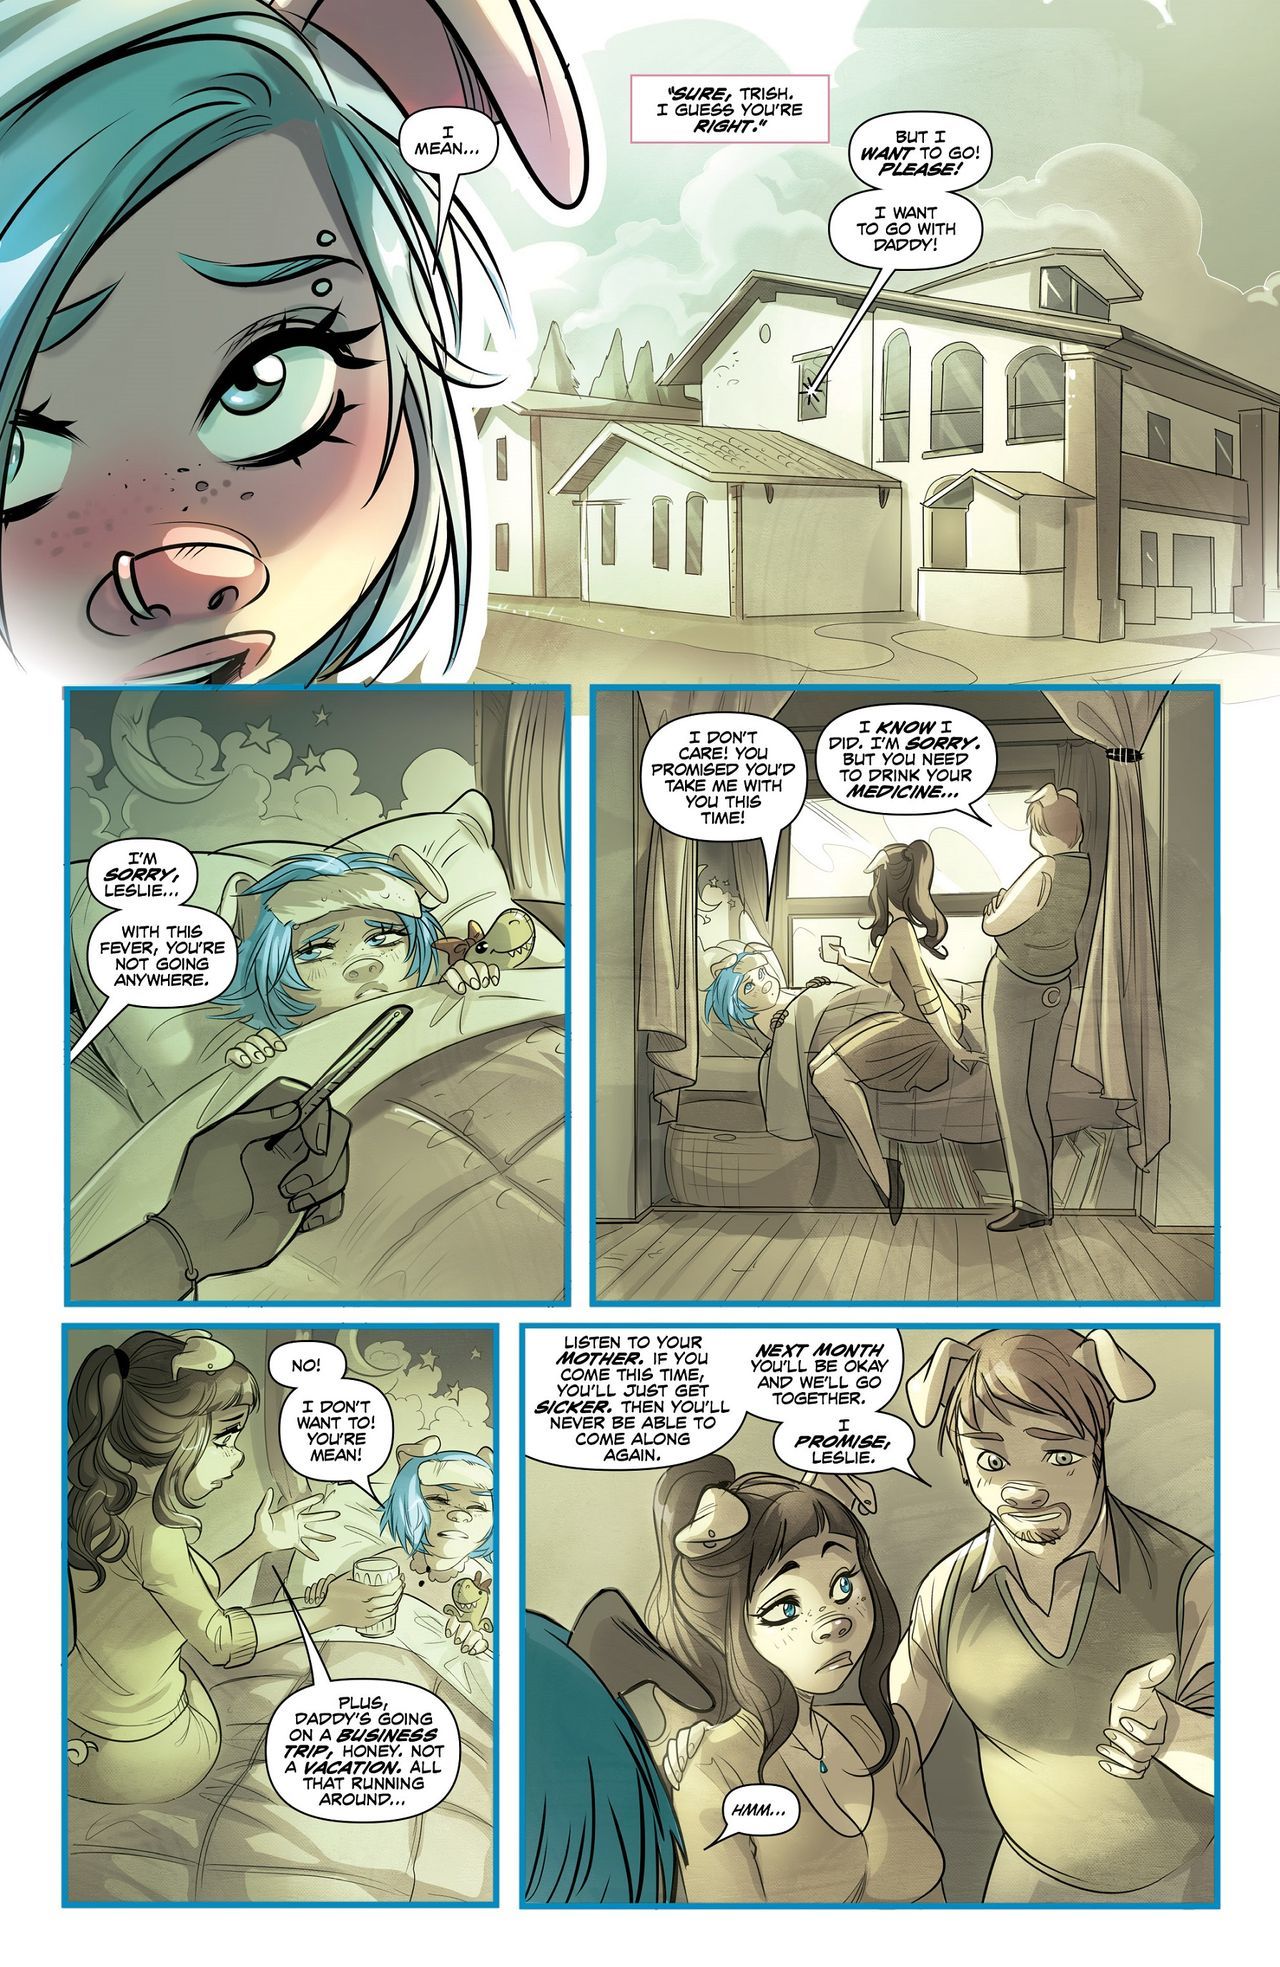 Unnatural Issue 2 by Mirka Andolfo page 7